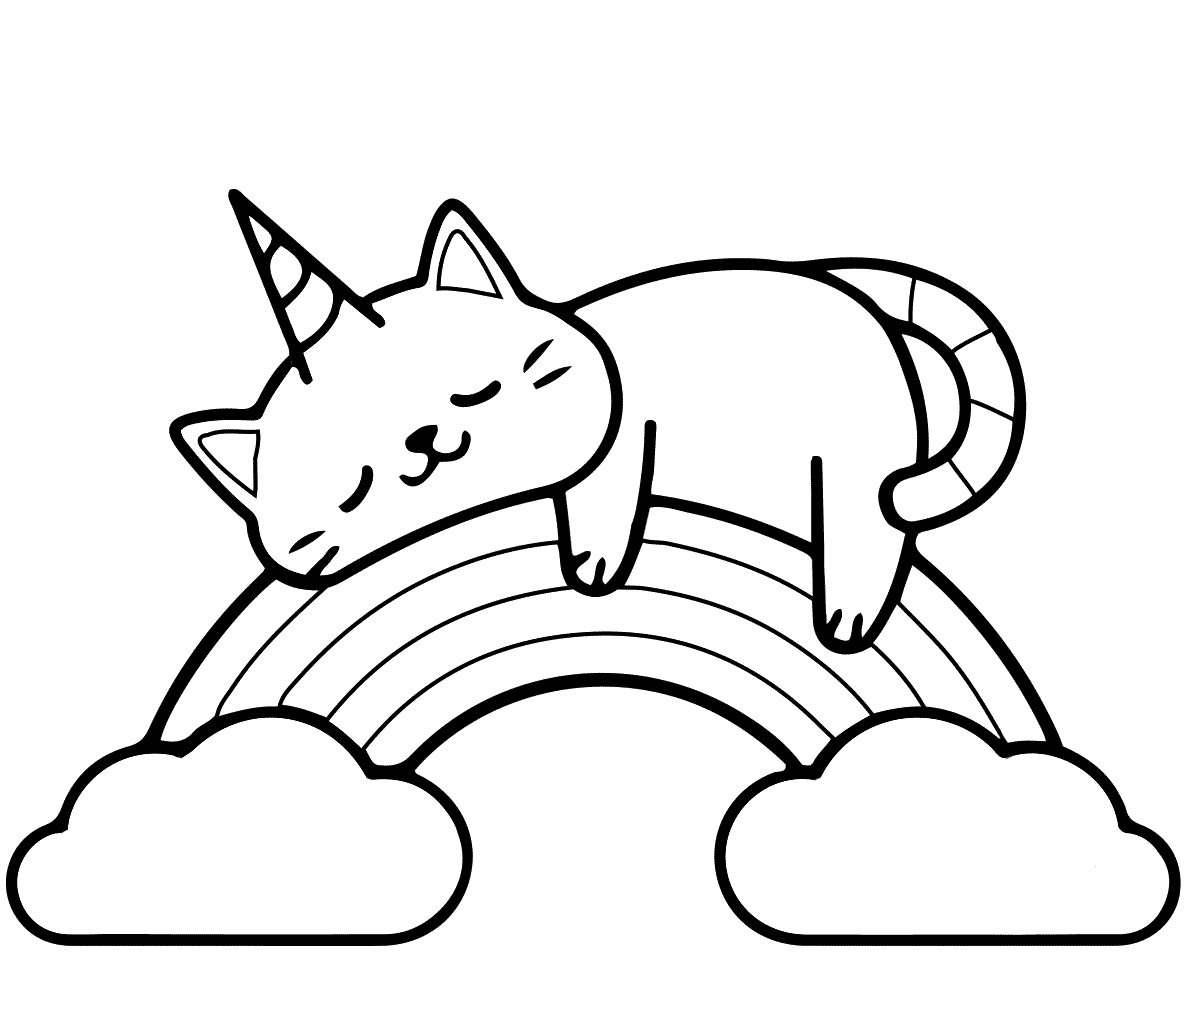 Unicorn cat lies on the rainbow Coloring Pages